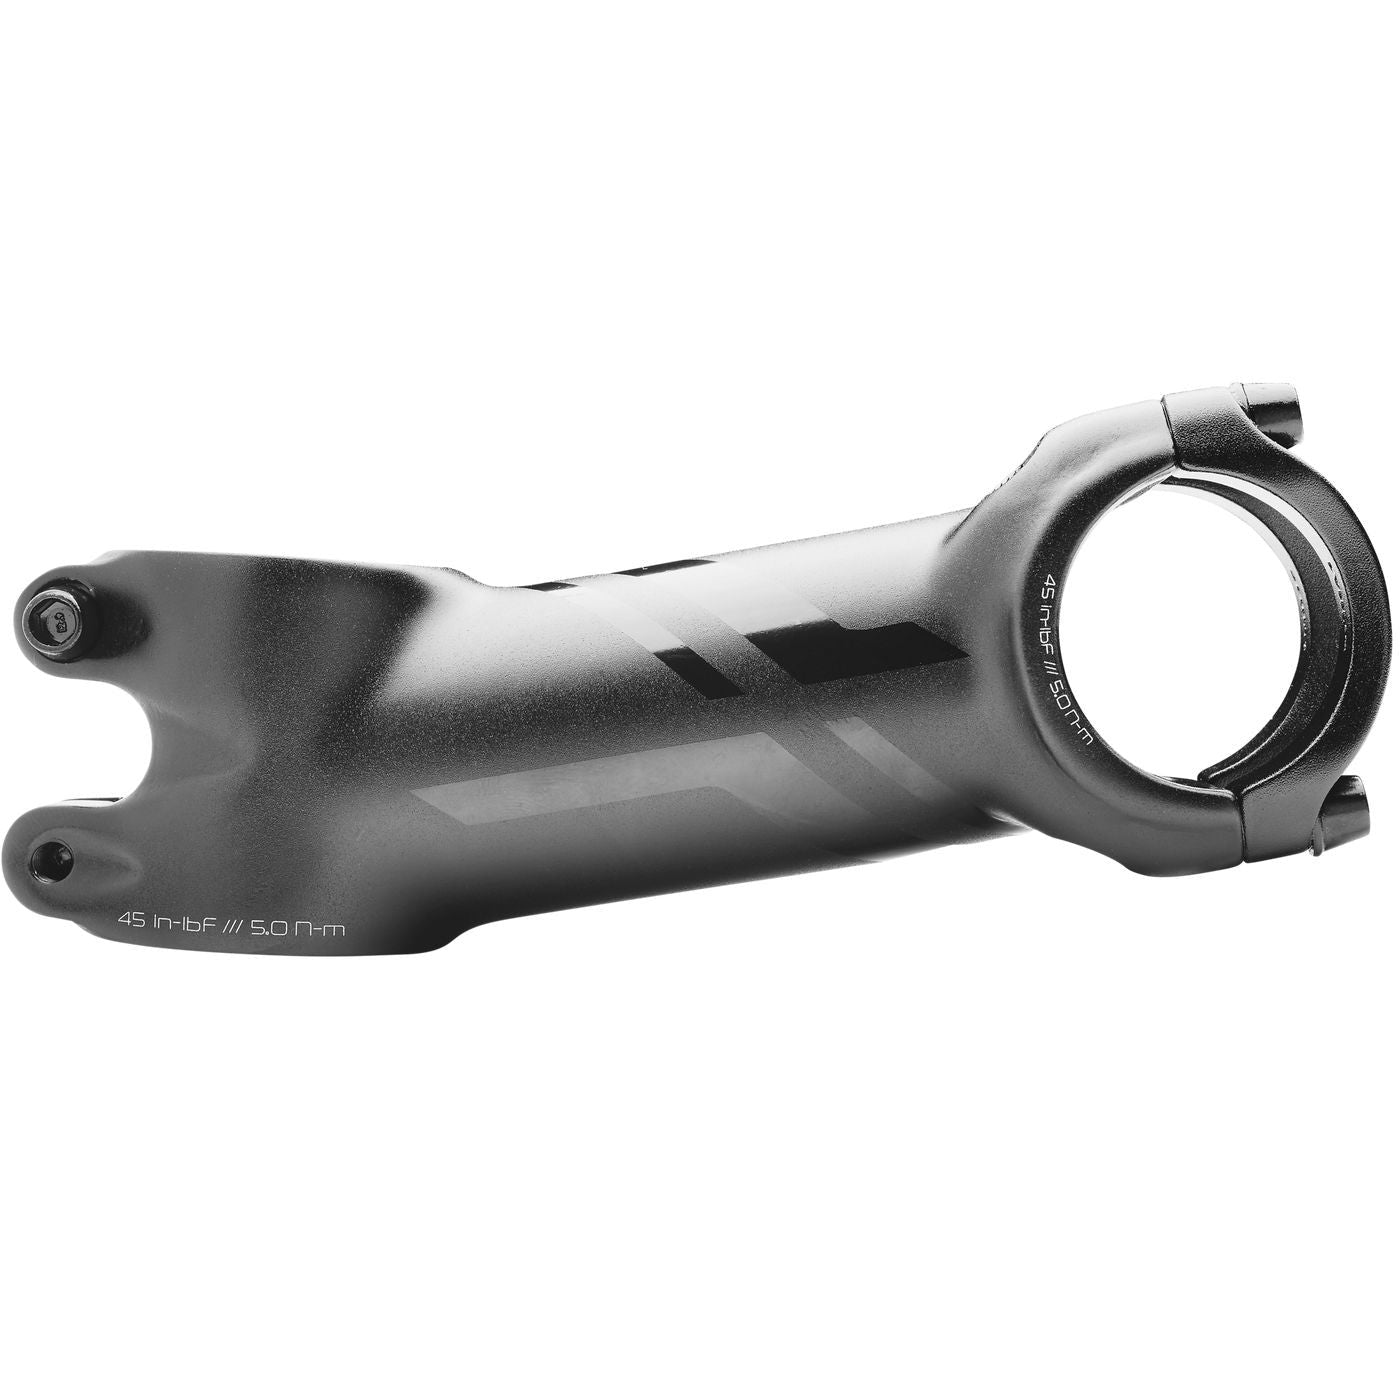 Specialized Comp Multi Bicycle Stem - Stems - Bicycle Warehouse